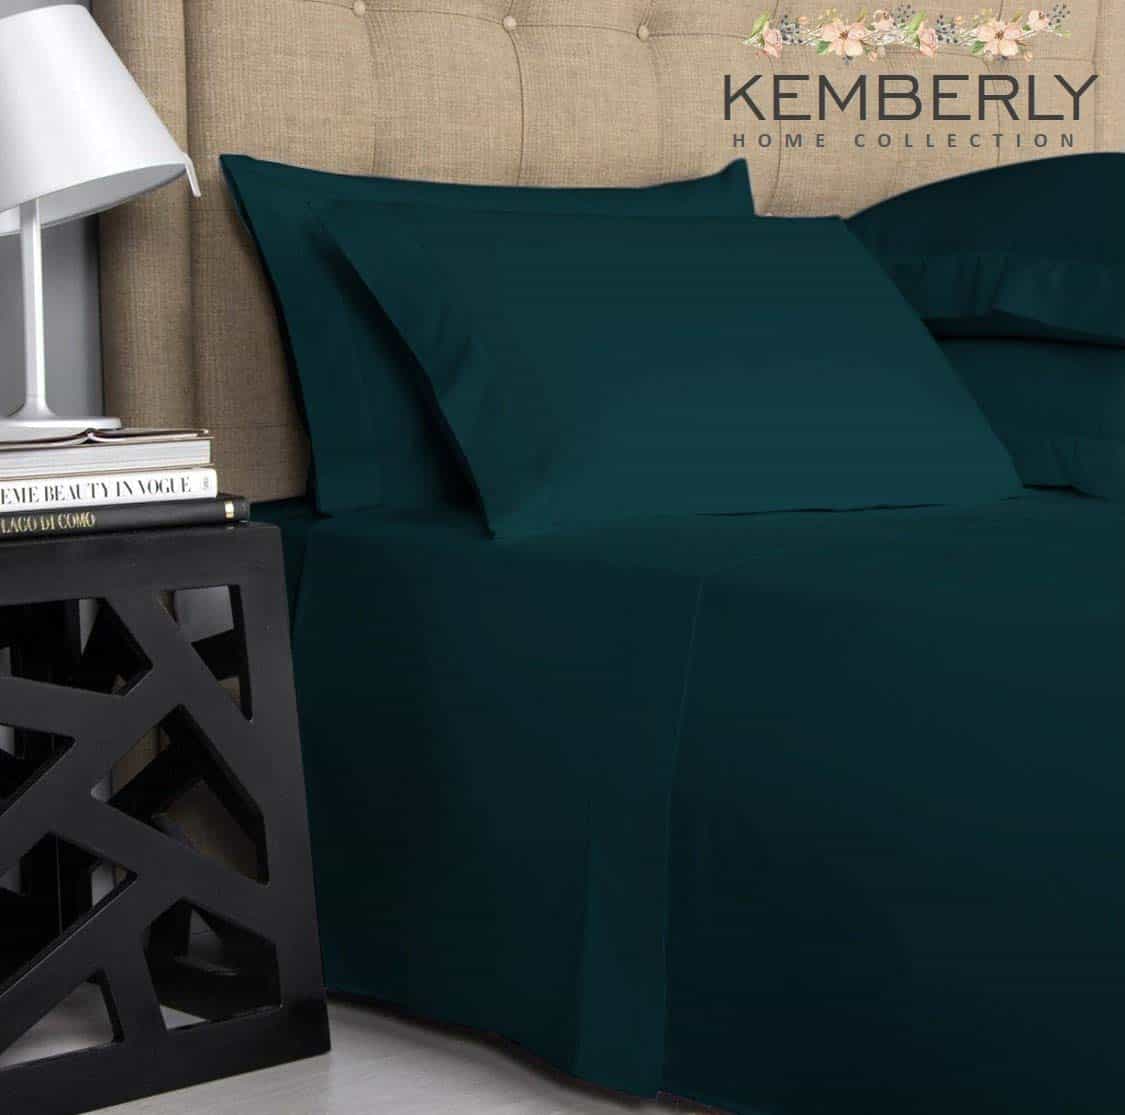 Kemberly Home Collection